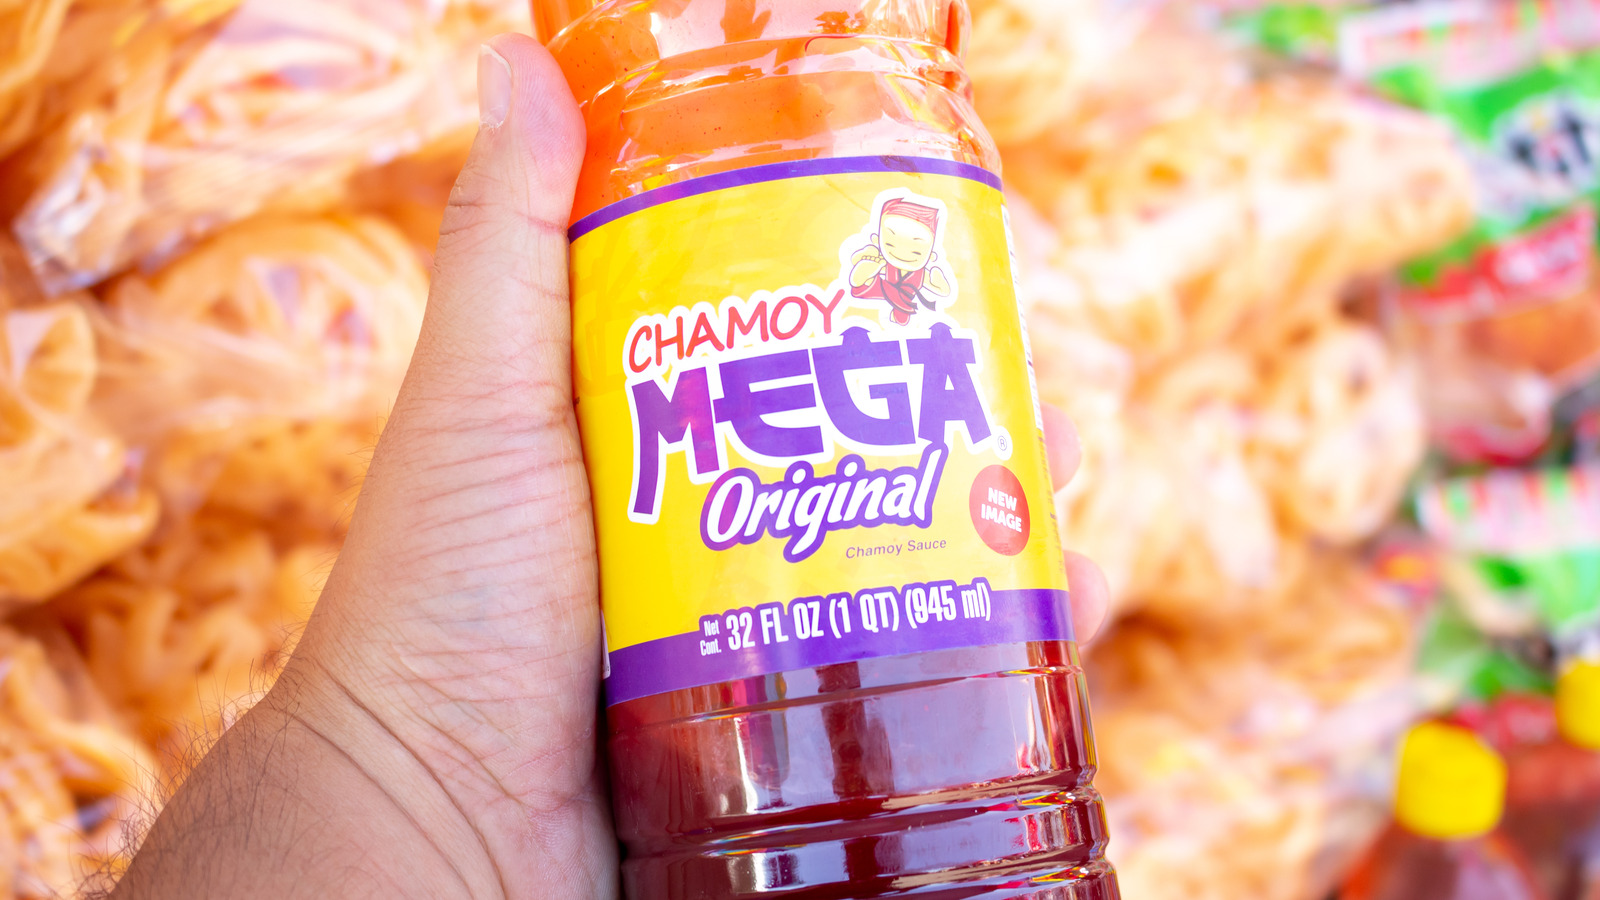 What Is Chamoy And What Does It Taste Like?